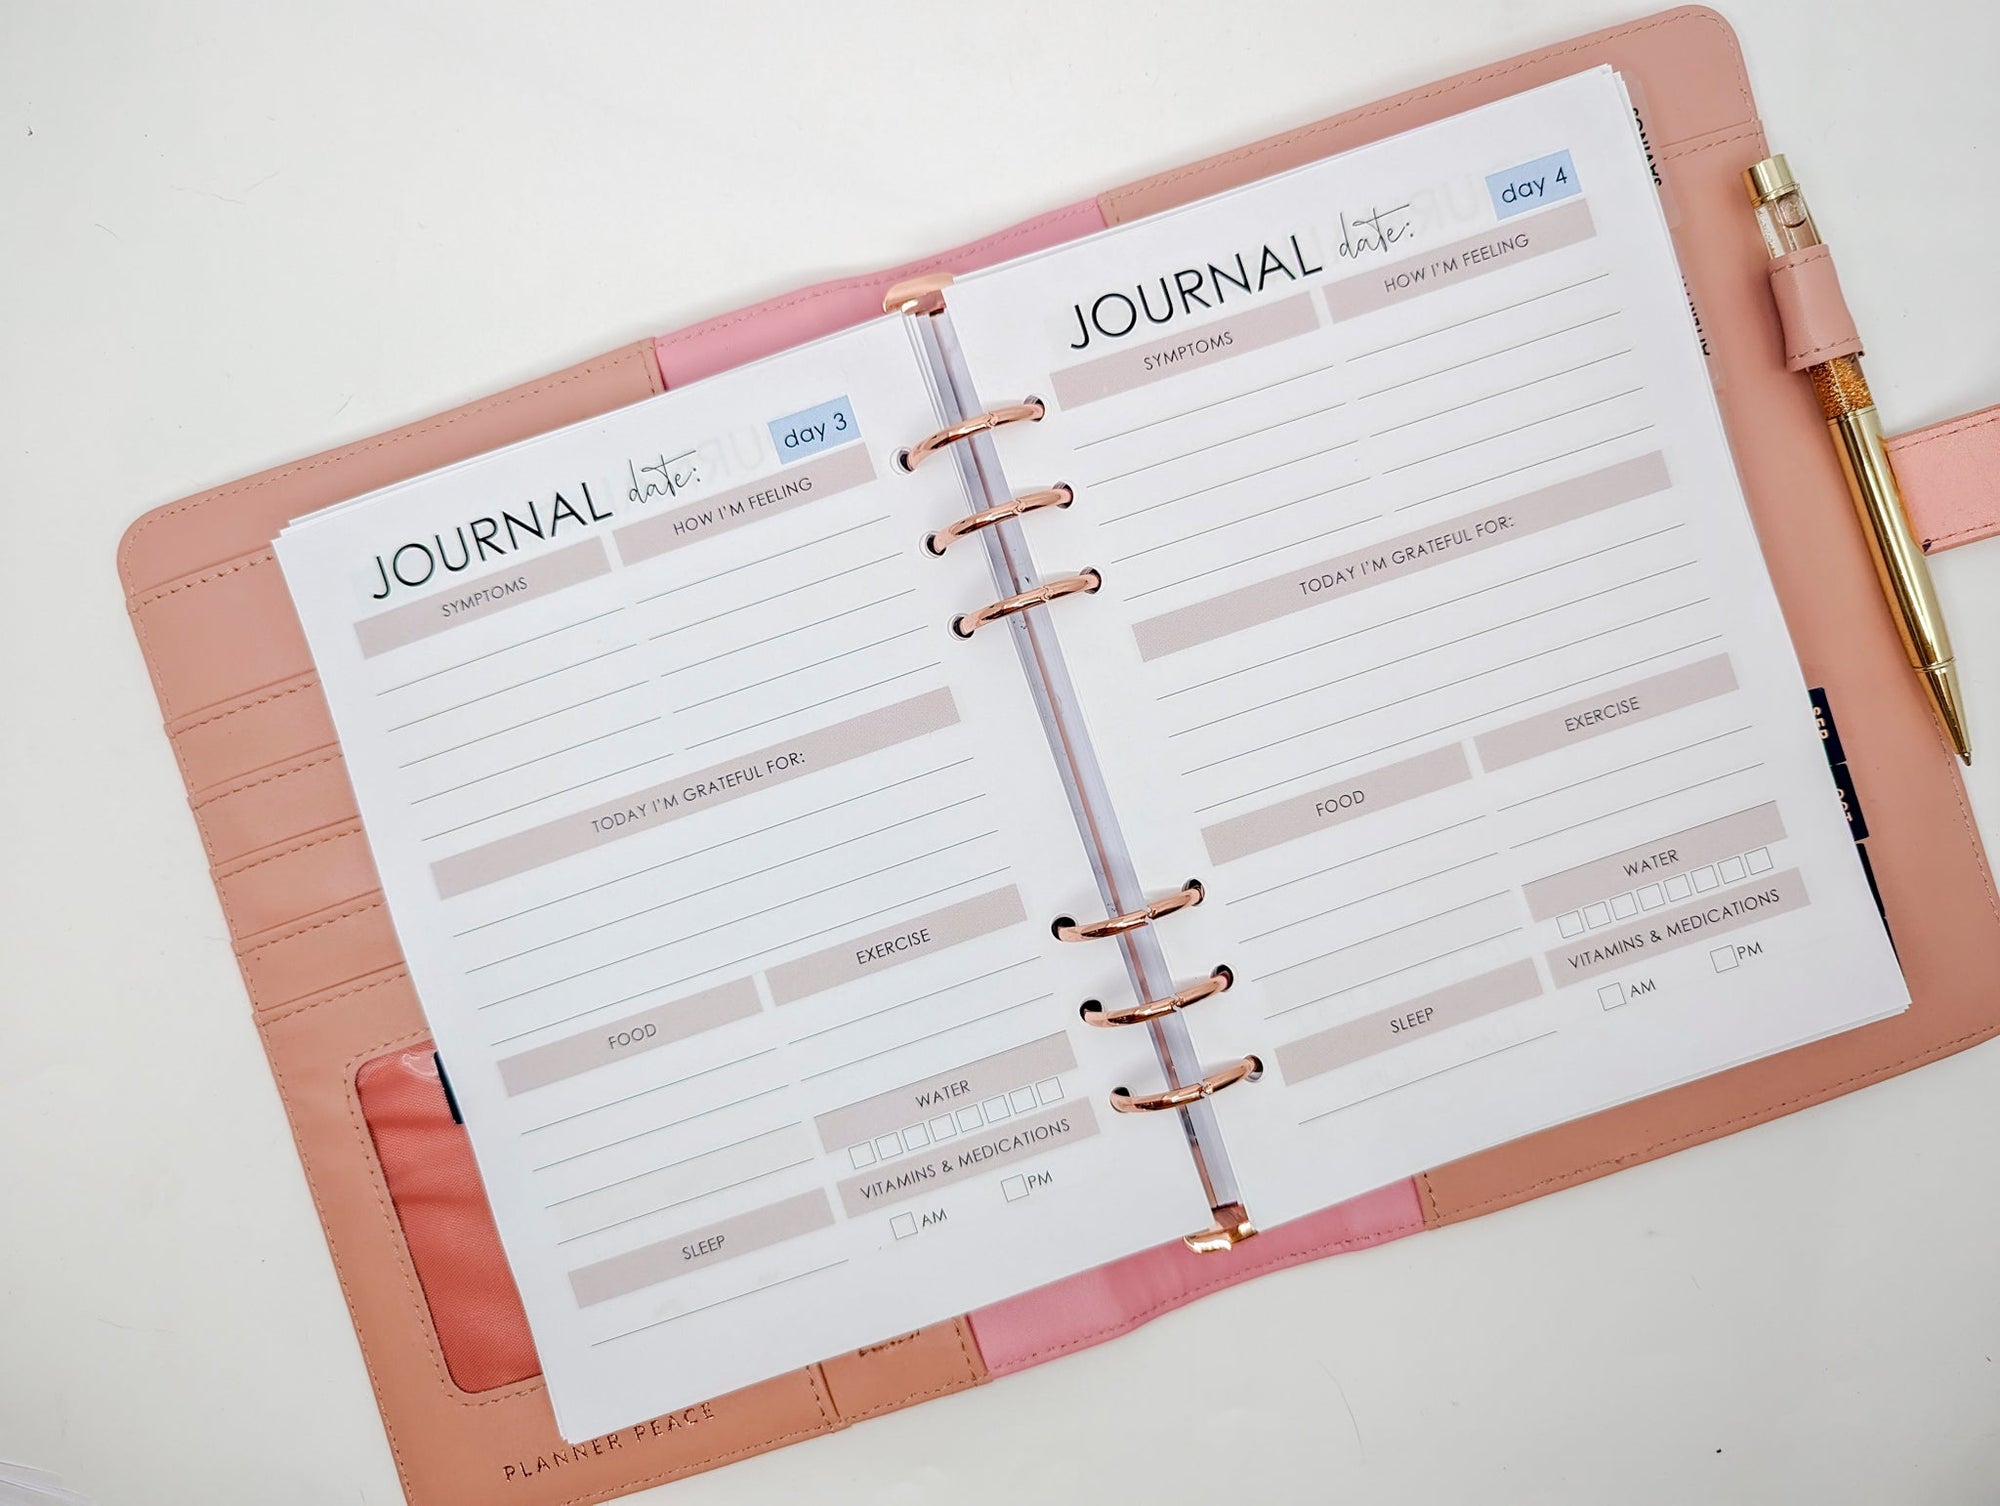 IVF Planner Bundle - Planner and Dividers Included